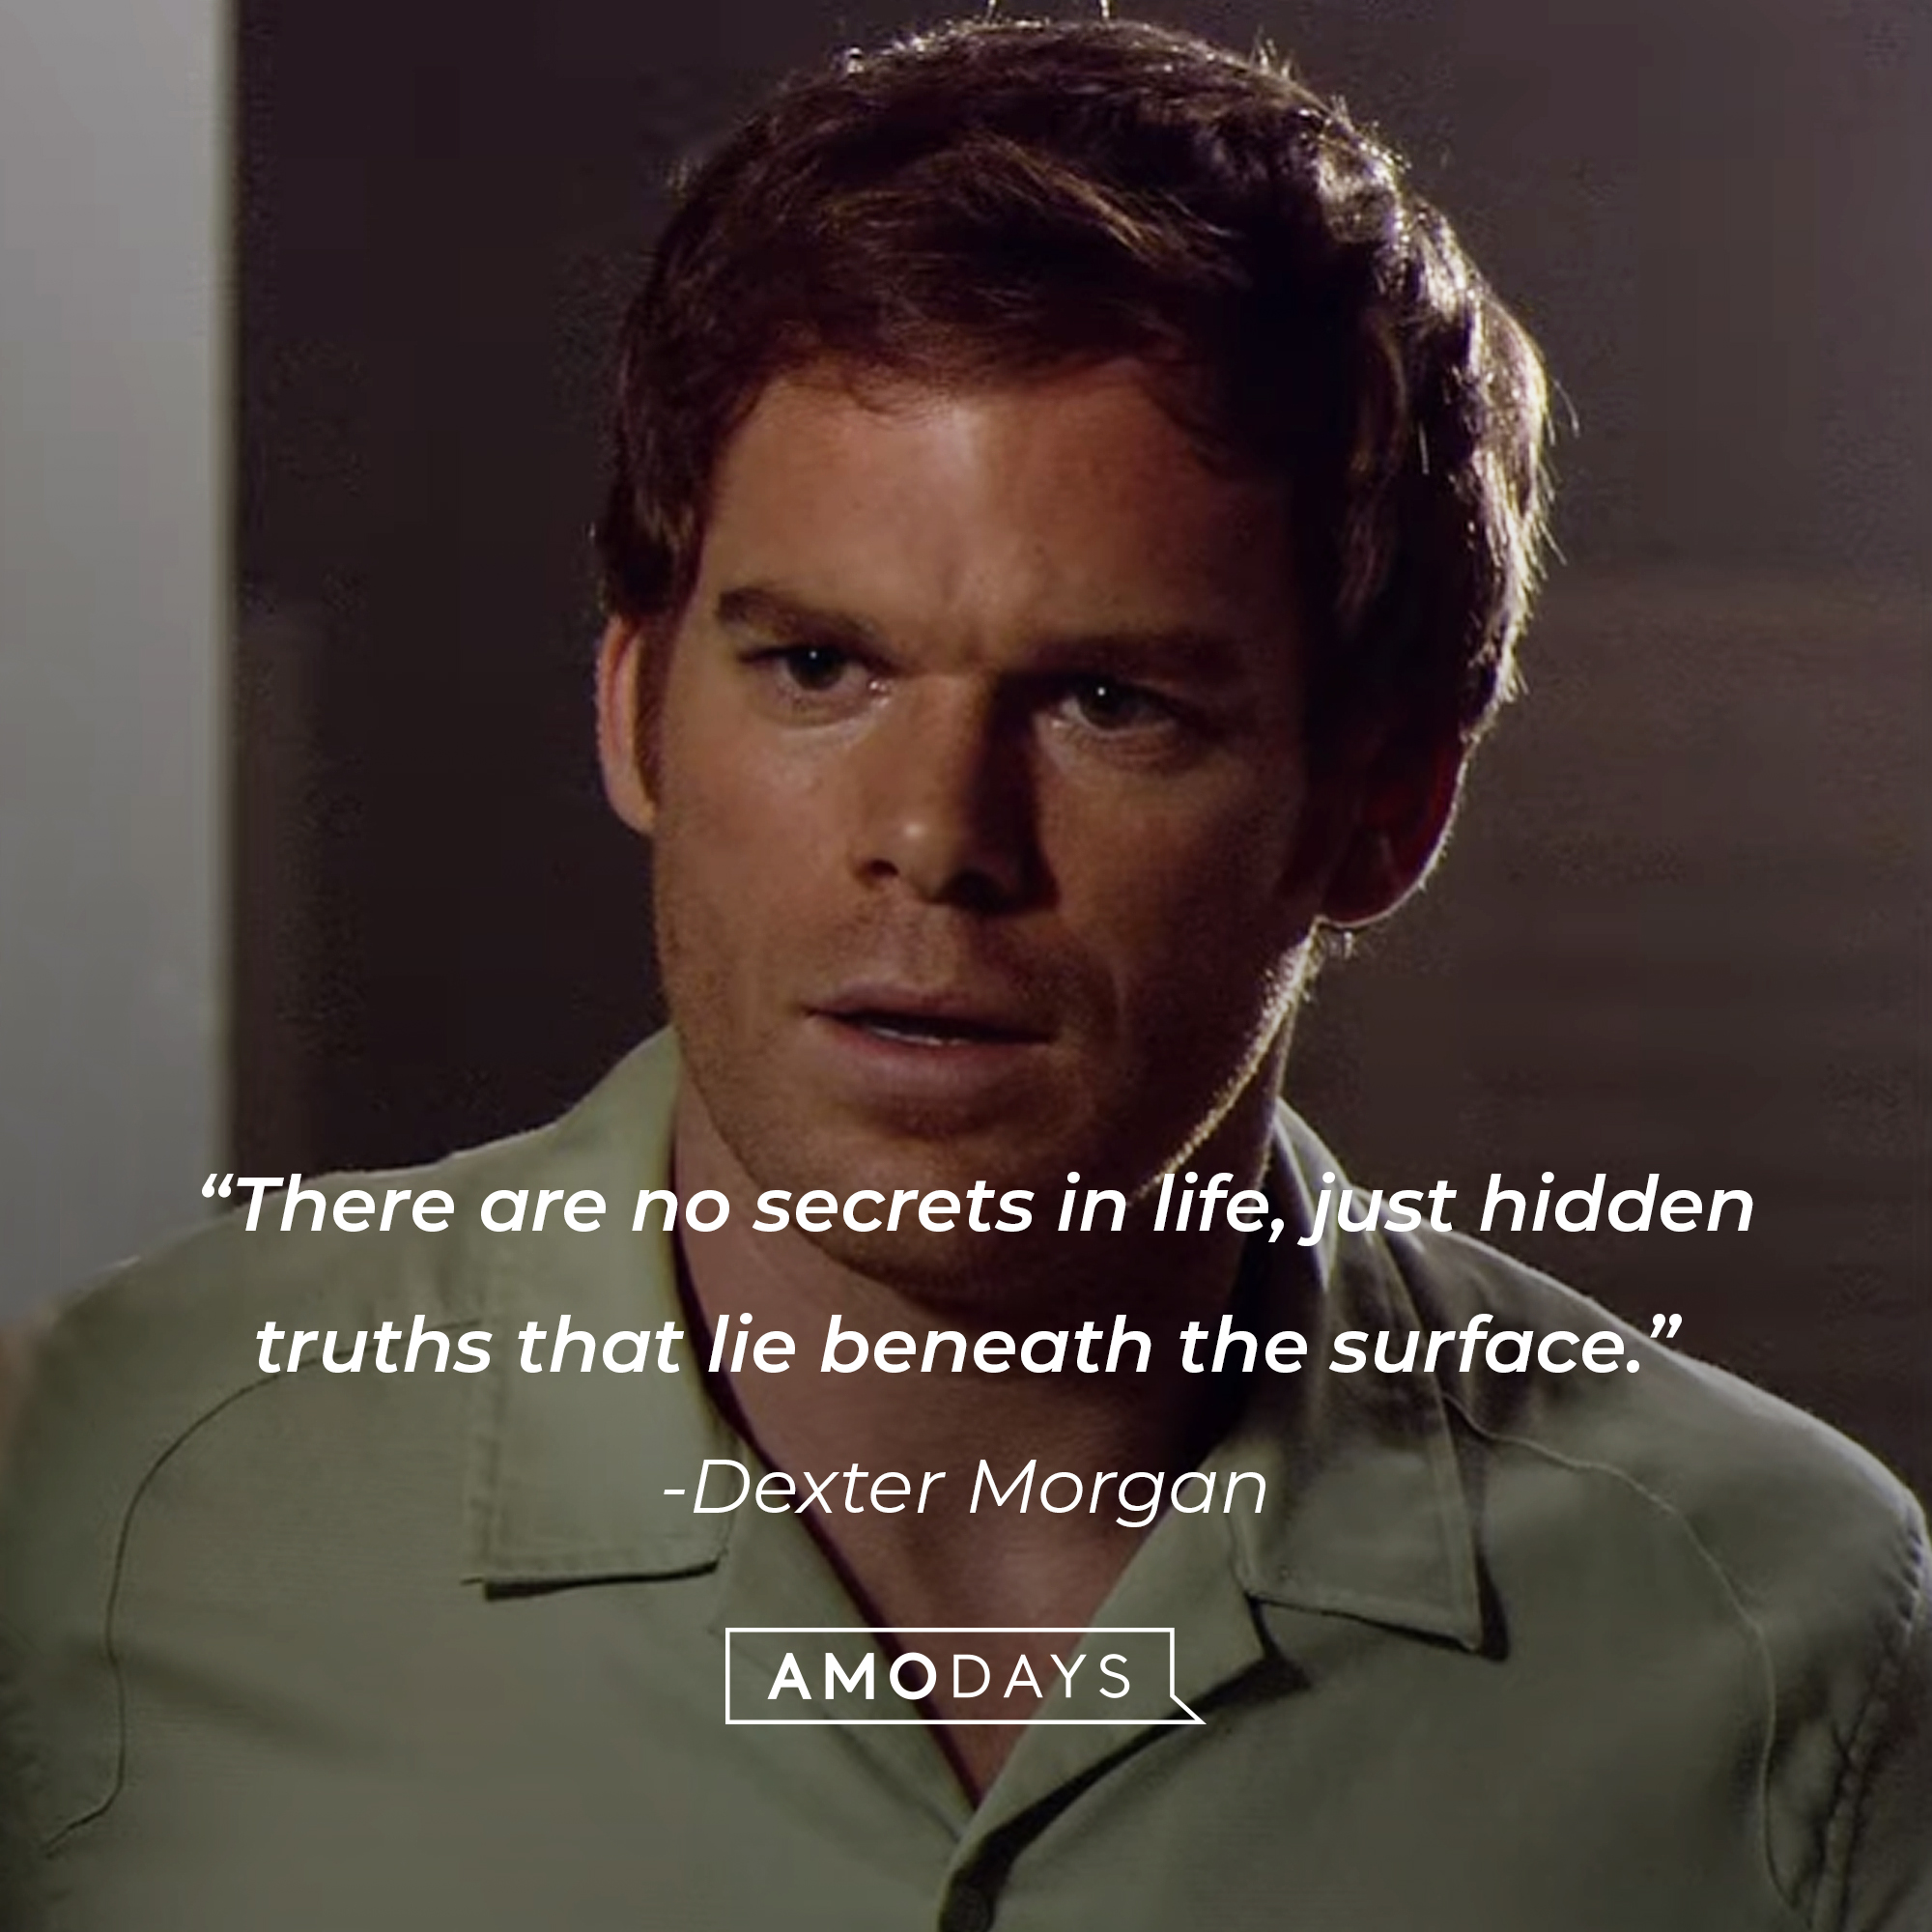 Dexter Morgan, with his quote: “There are no secrets in life, just hidden truths that lie beneath the surface.” | Source: Showtime